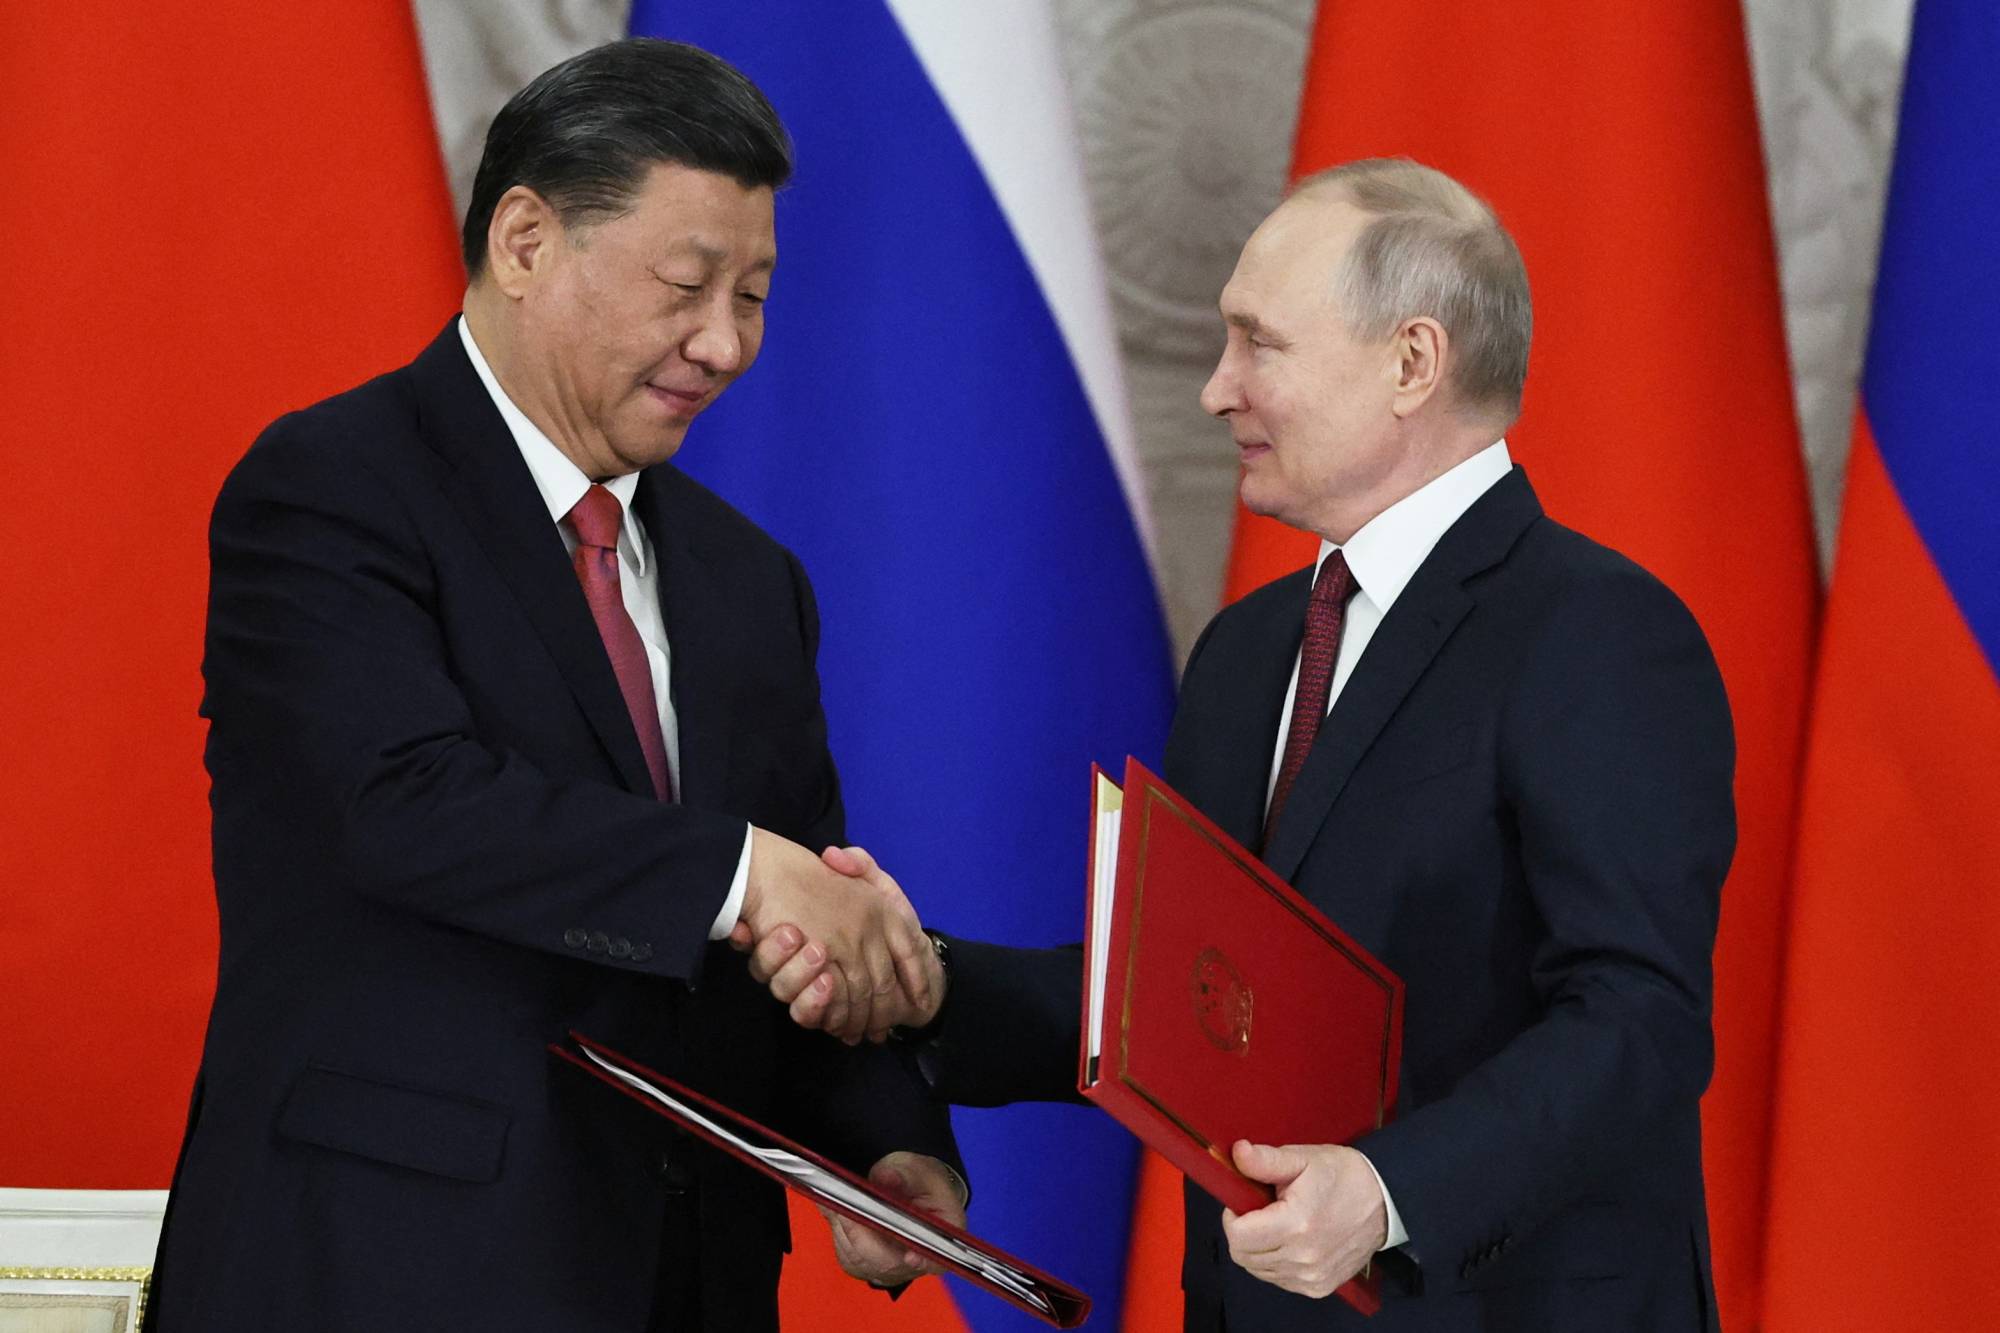 Chinese President Xi Jinping shakes hands with Russian President Vladimir Putin during a signing ceremony following talks at the Kremlin in Moscow on March 21. | POOL / SPUTNIK / VIA REUTERS